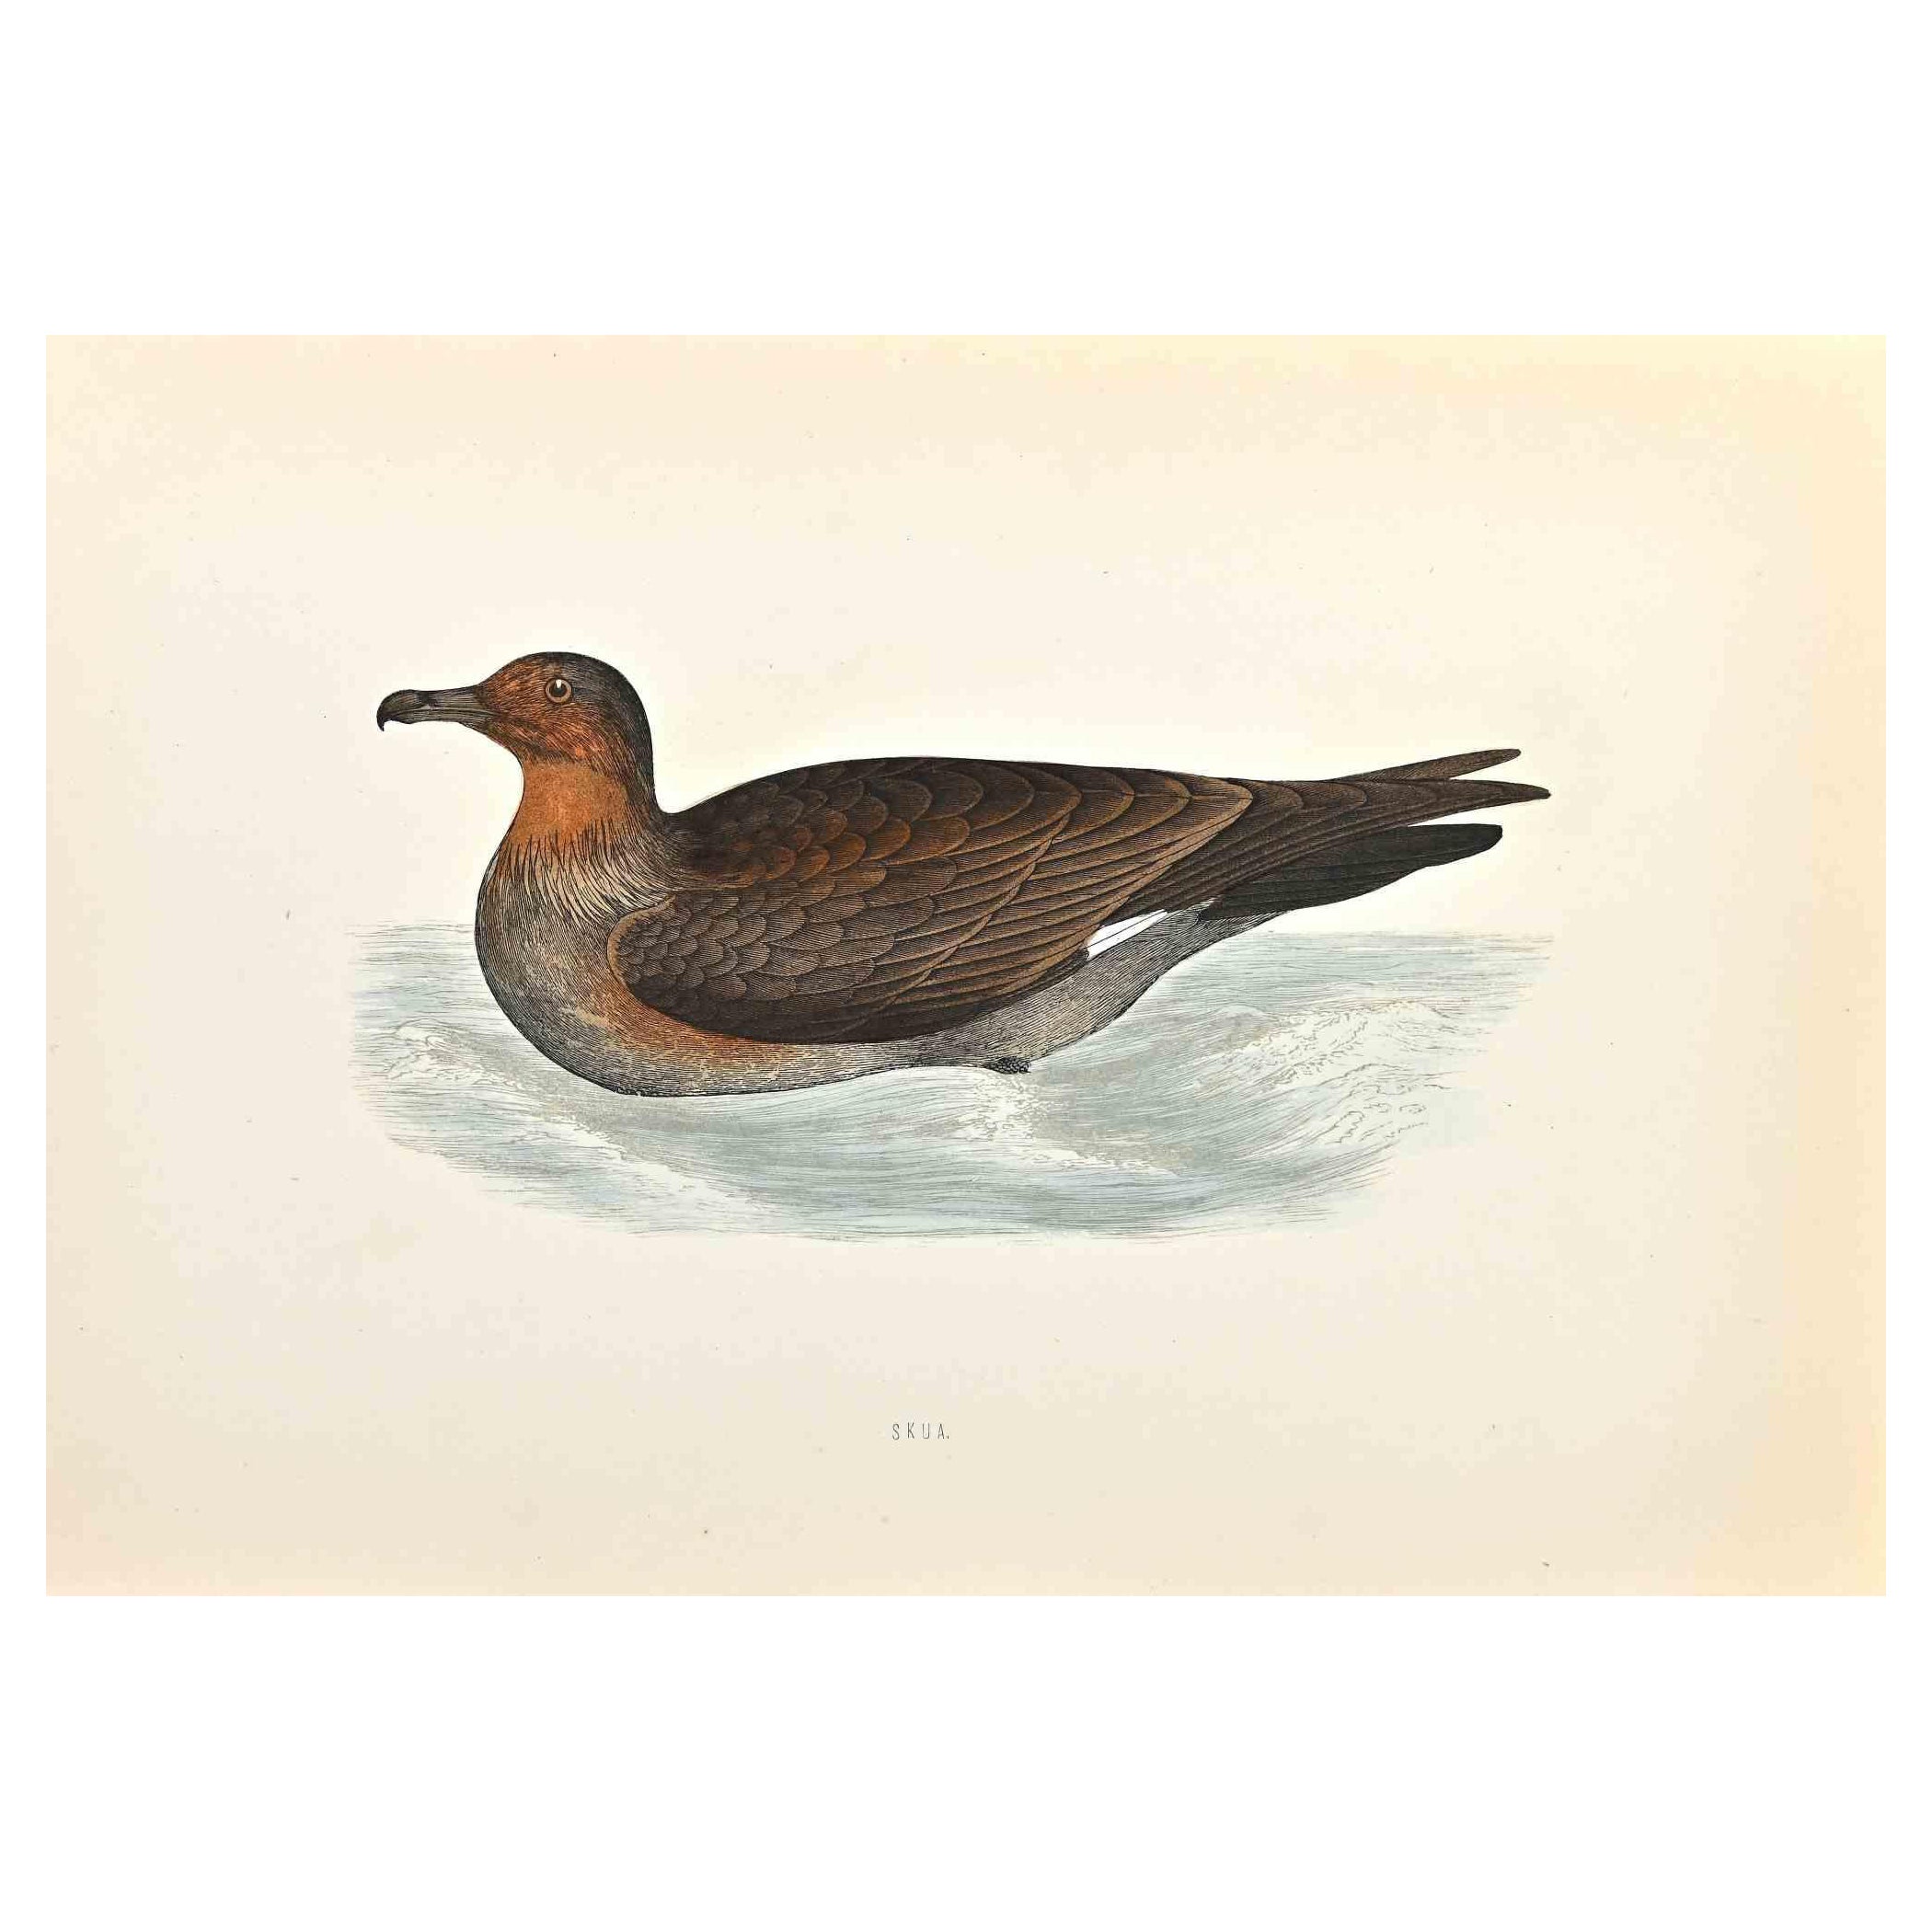 Skua is a modern artwork realized in 1870 by the British artist Alexander Francis Lydon (1836-1917).

Woodcut print on ivory-colored paper.

Hand-colored, published by London, Bell & Sons, 1870.  

The name of the bird is printed on the plate. This